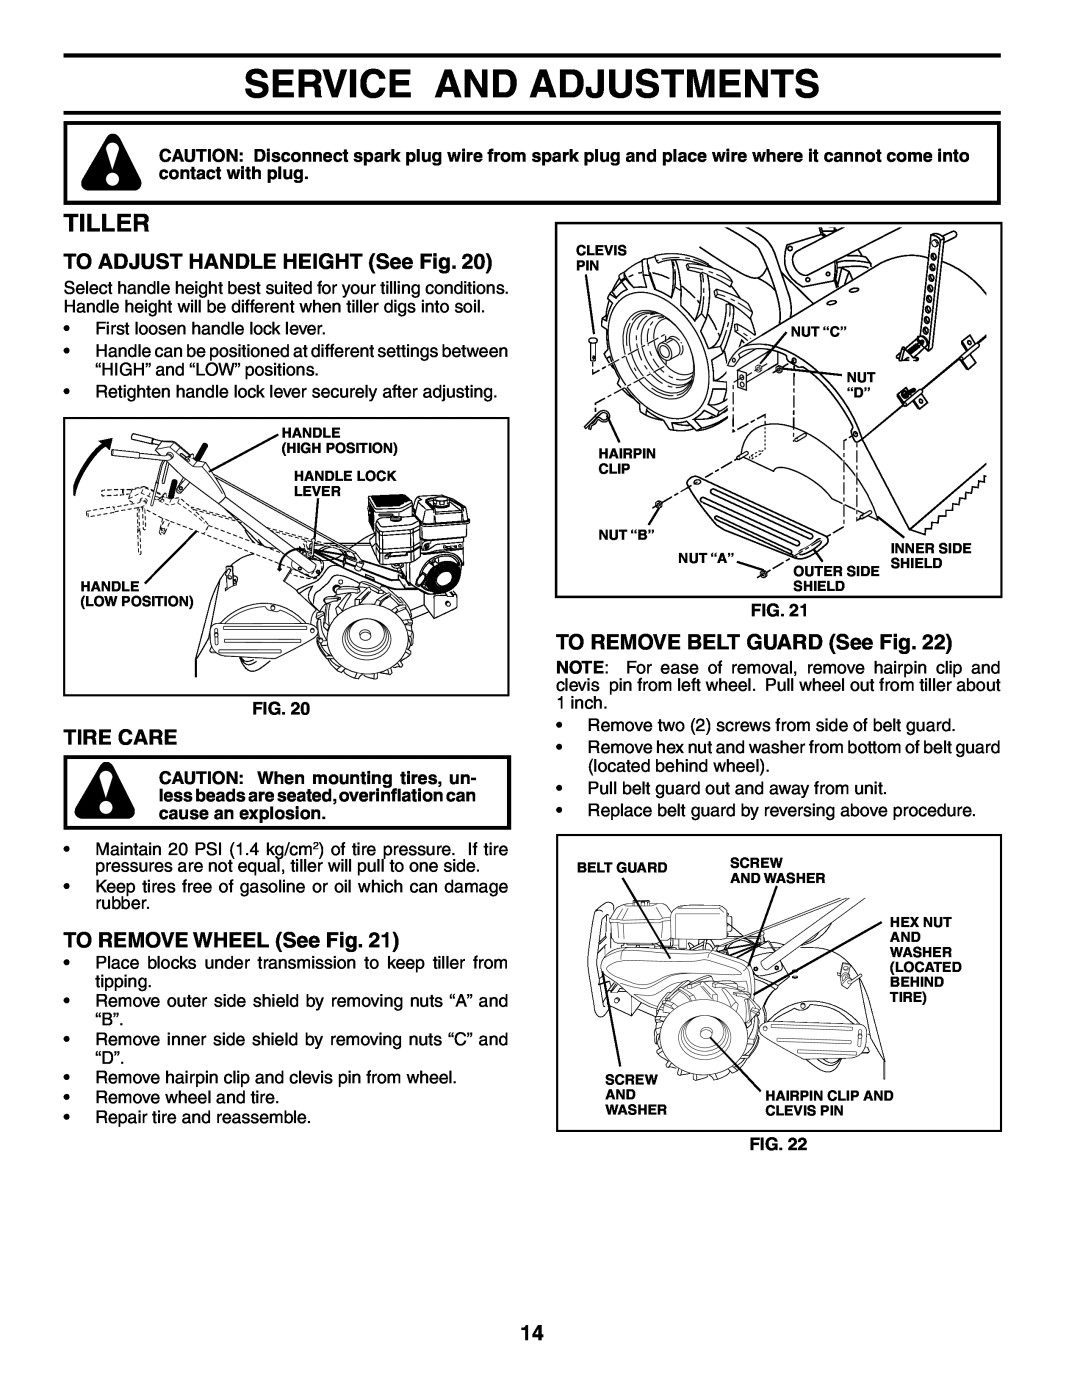 Poulan 184865 Service And Adjustments, Tiller, TO ADJUST HANDLE HEIGHT See Fig, Tire Care, TO REMOVE WHEEL See Fig 